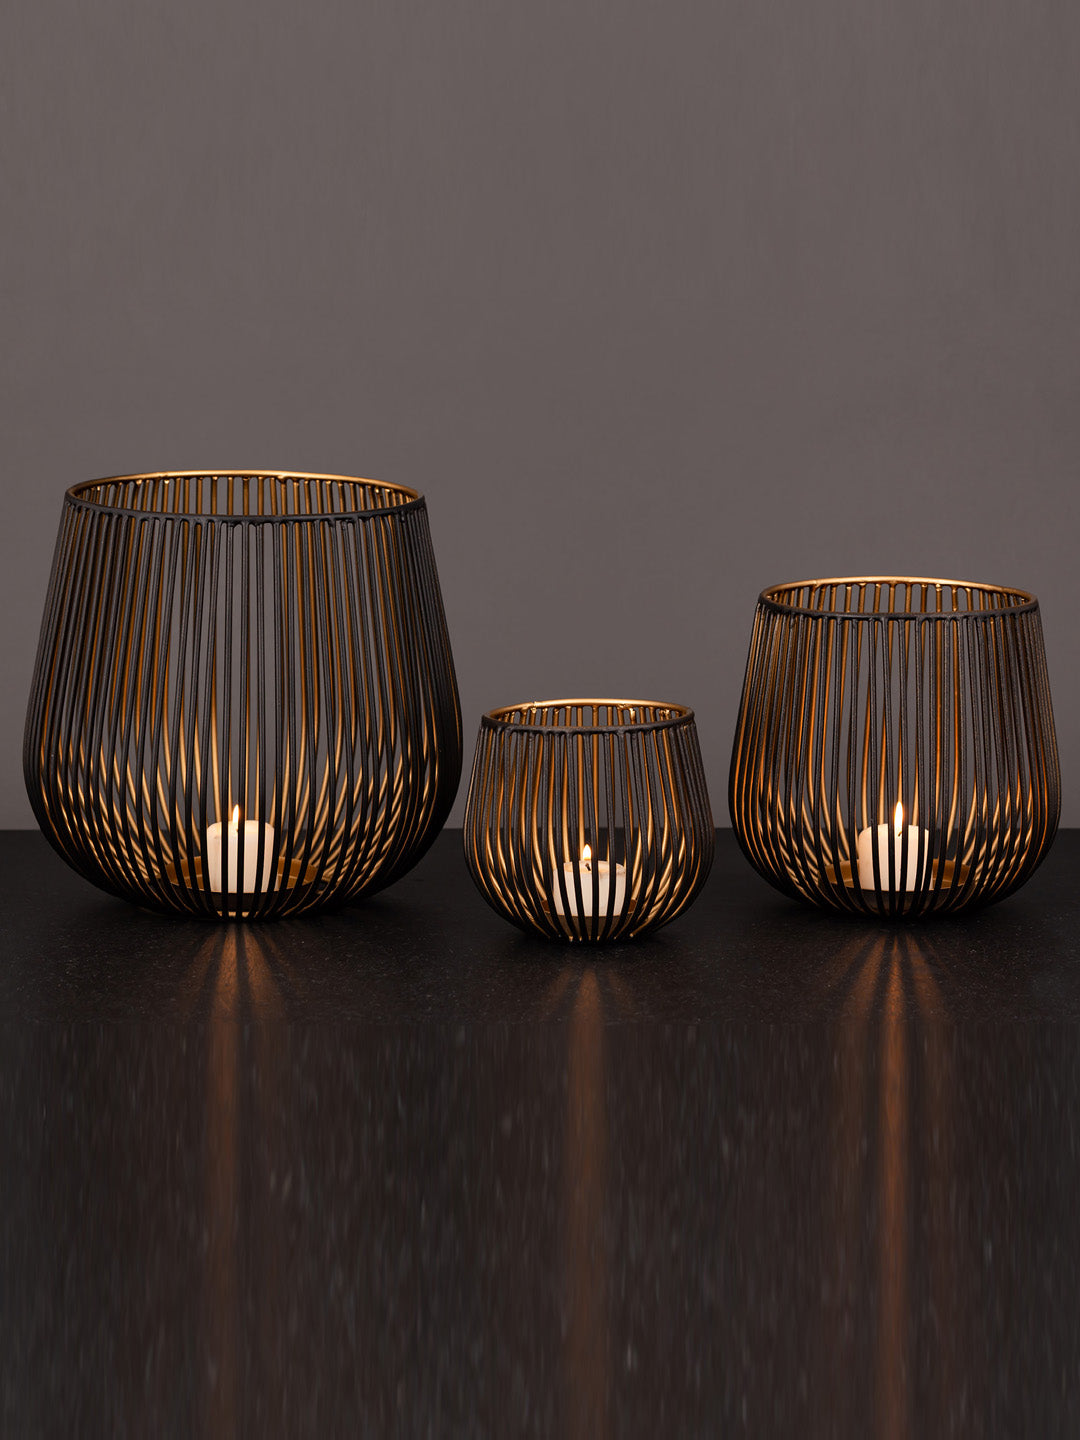 Set of 3 Black and Gold Metal Candle Holder